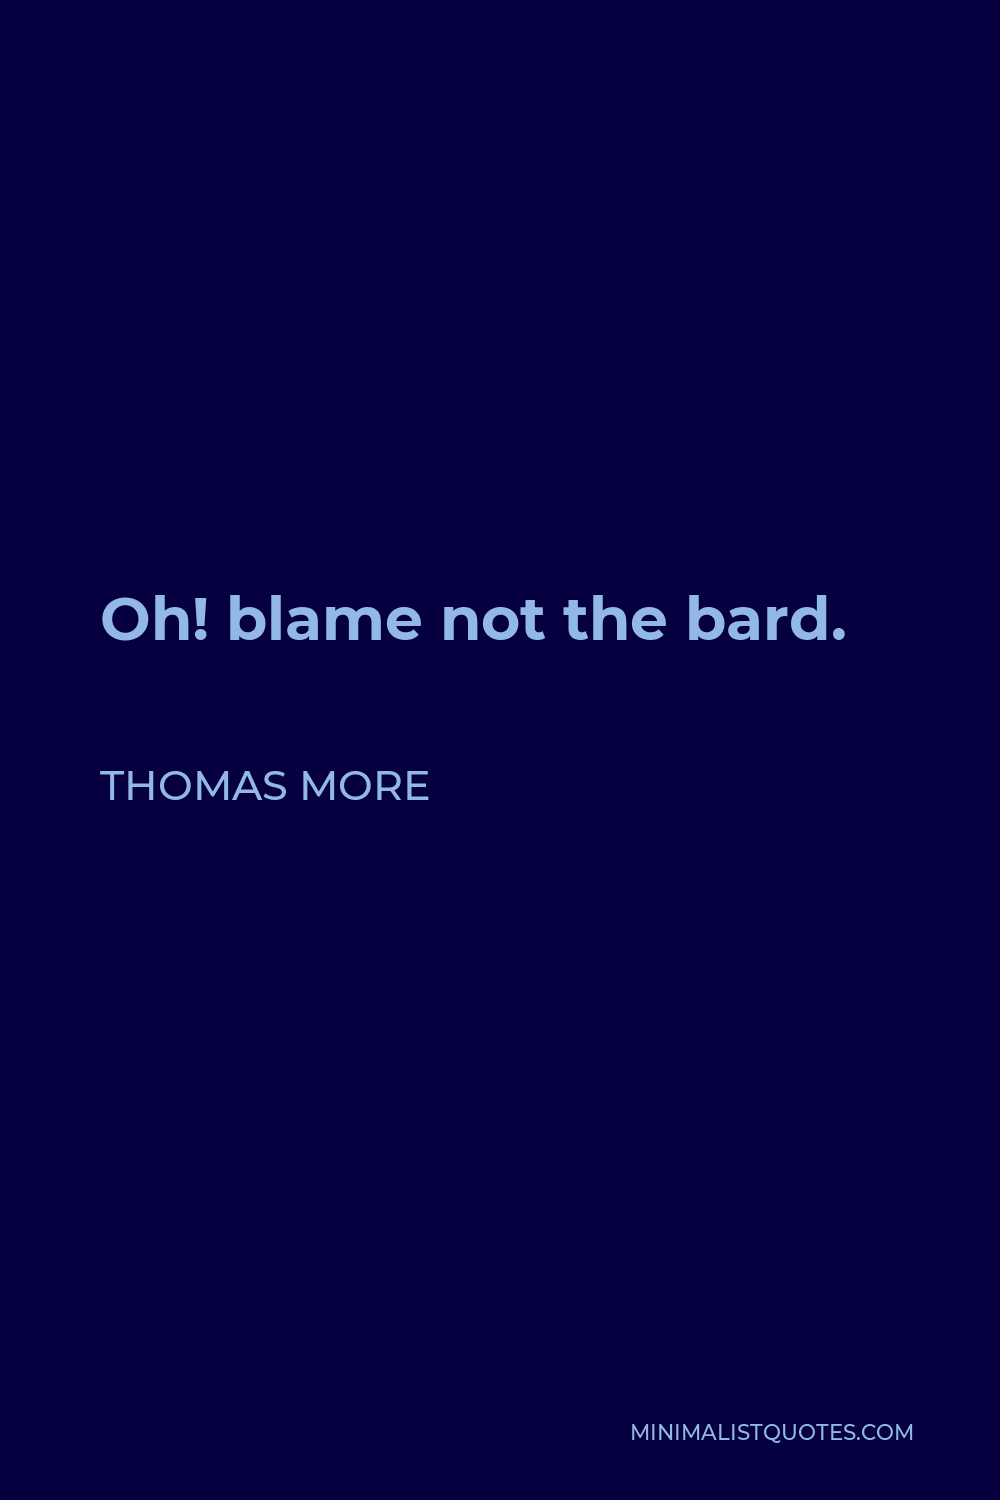 Thomas More Quote - Oh! blame not the bard.